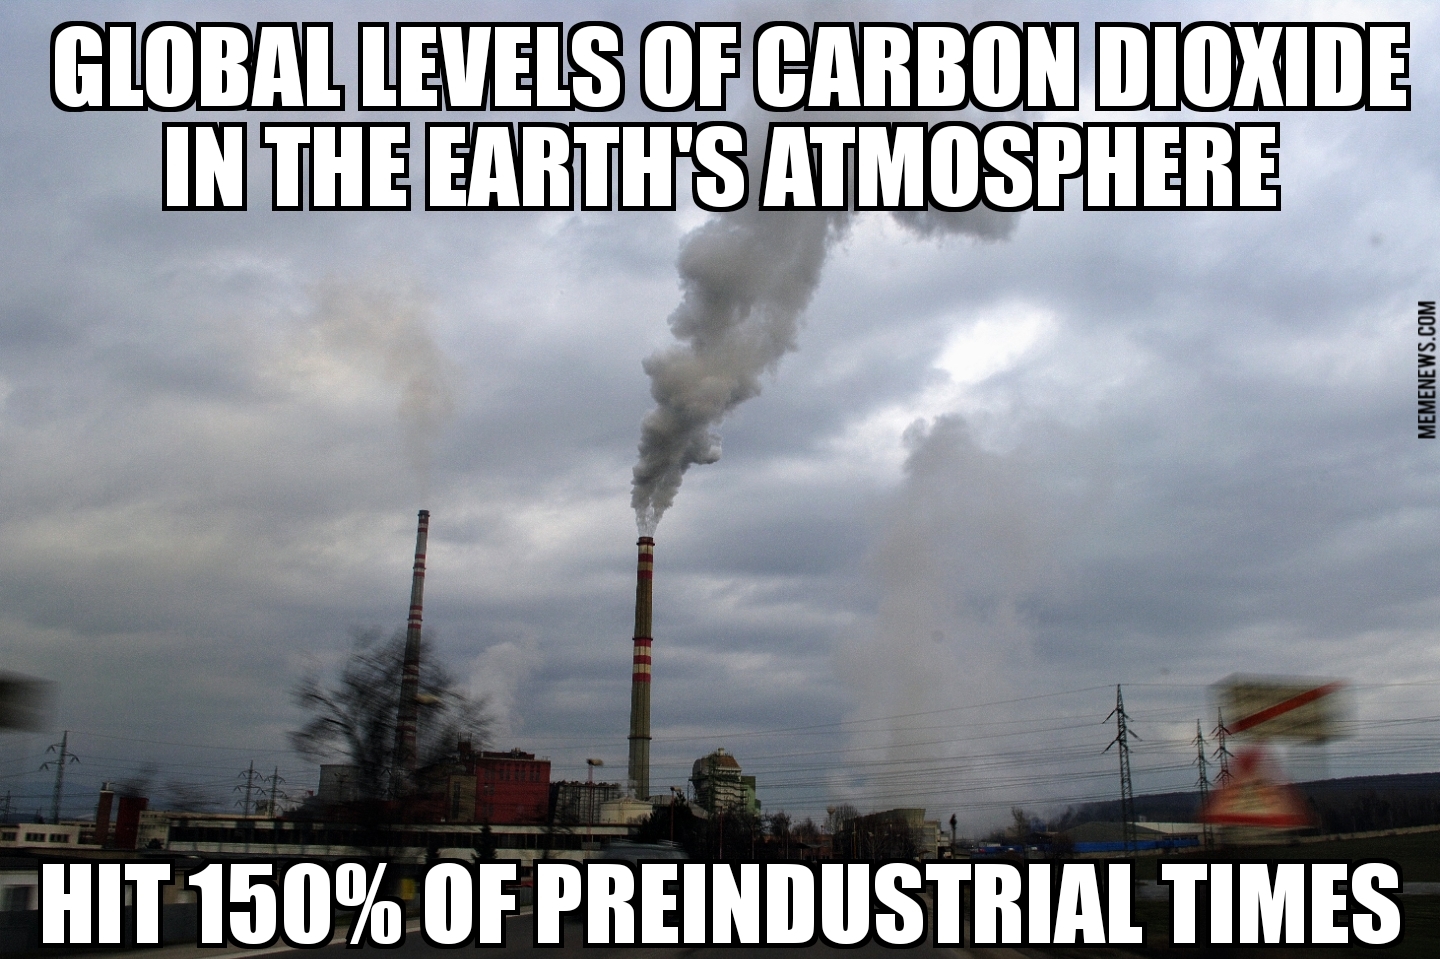 CO2 levels hit 150% of preindustrial times